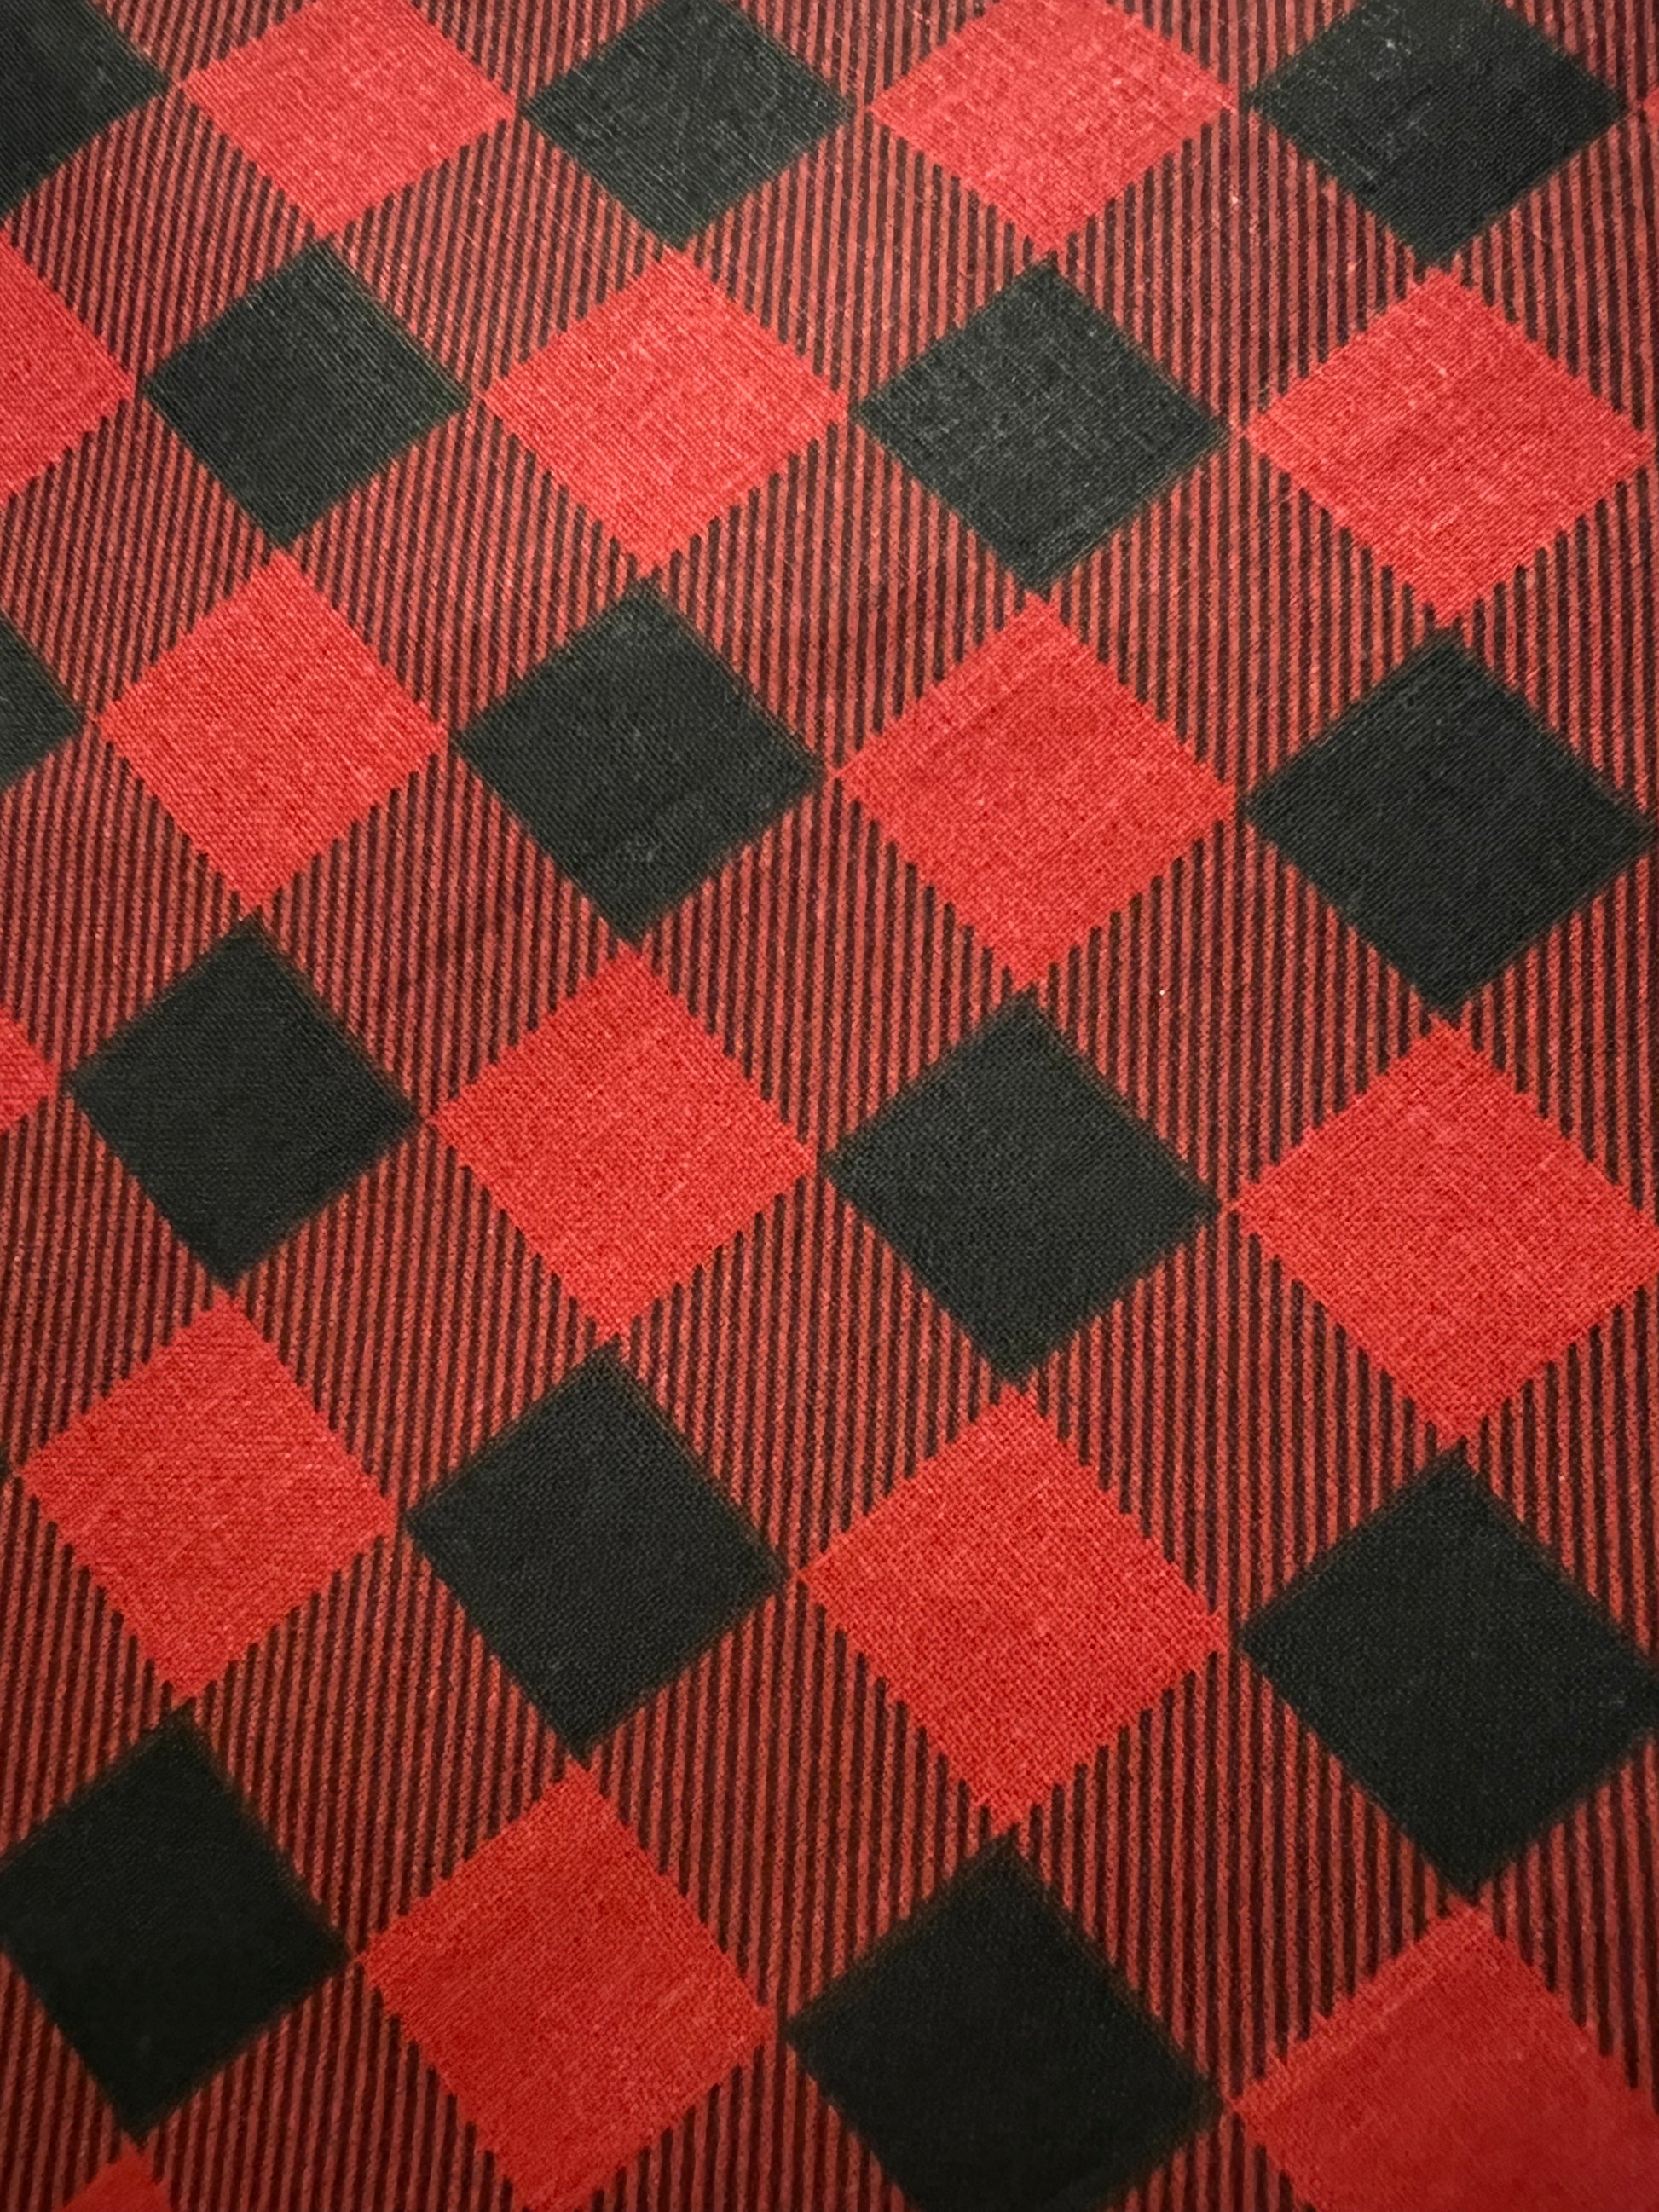 Red and Black Buffalo Plaid - AussomePups